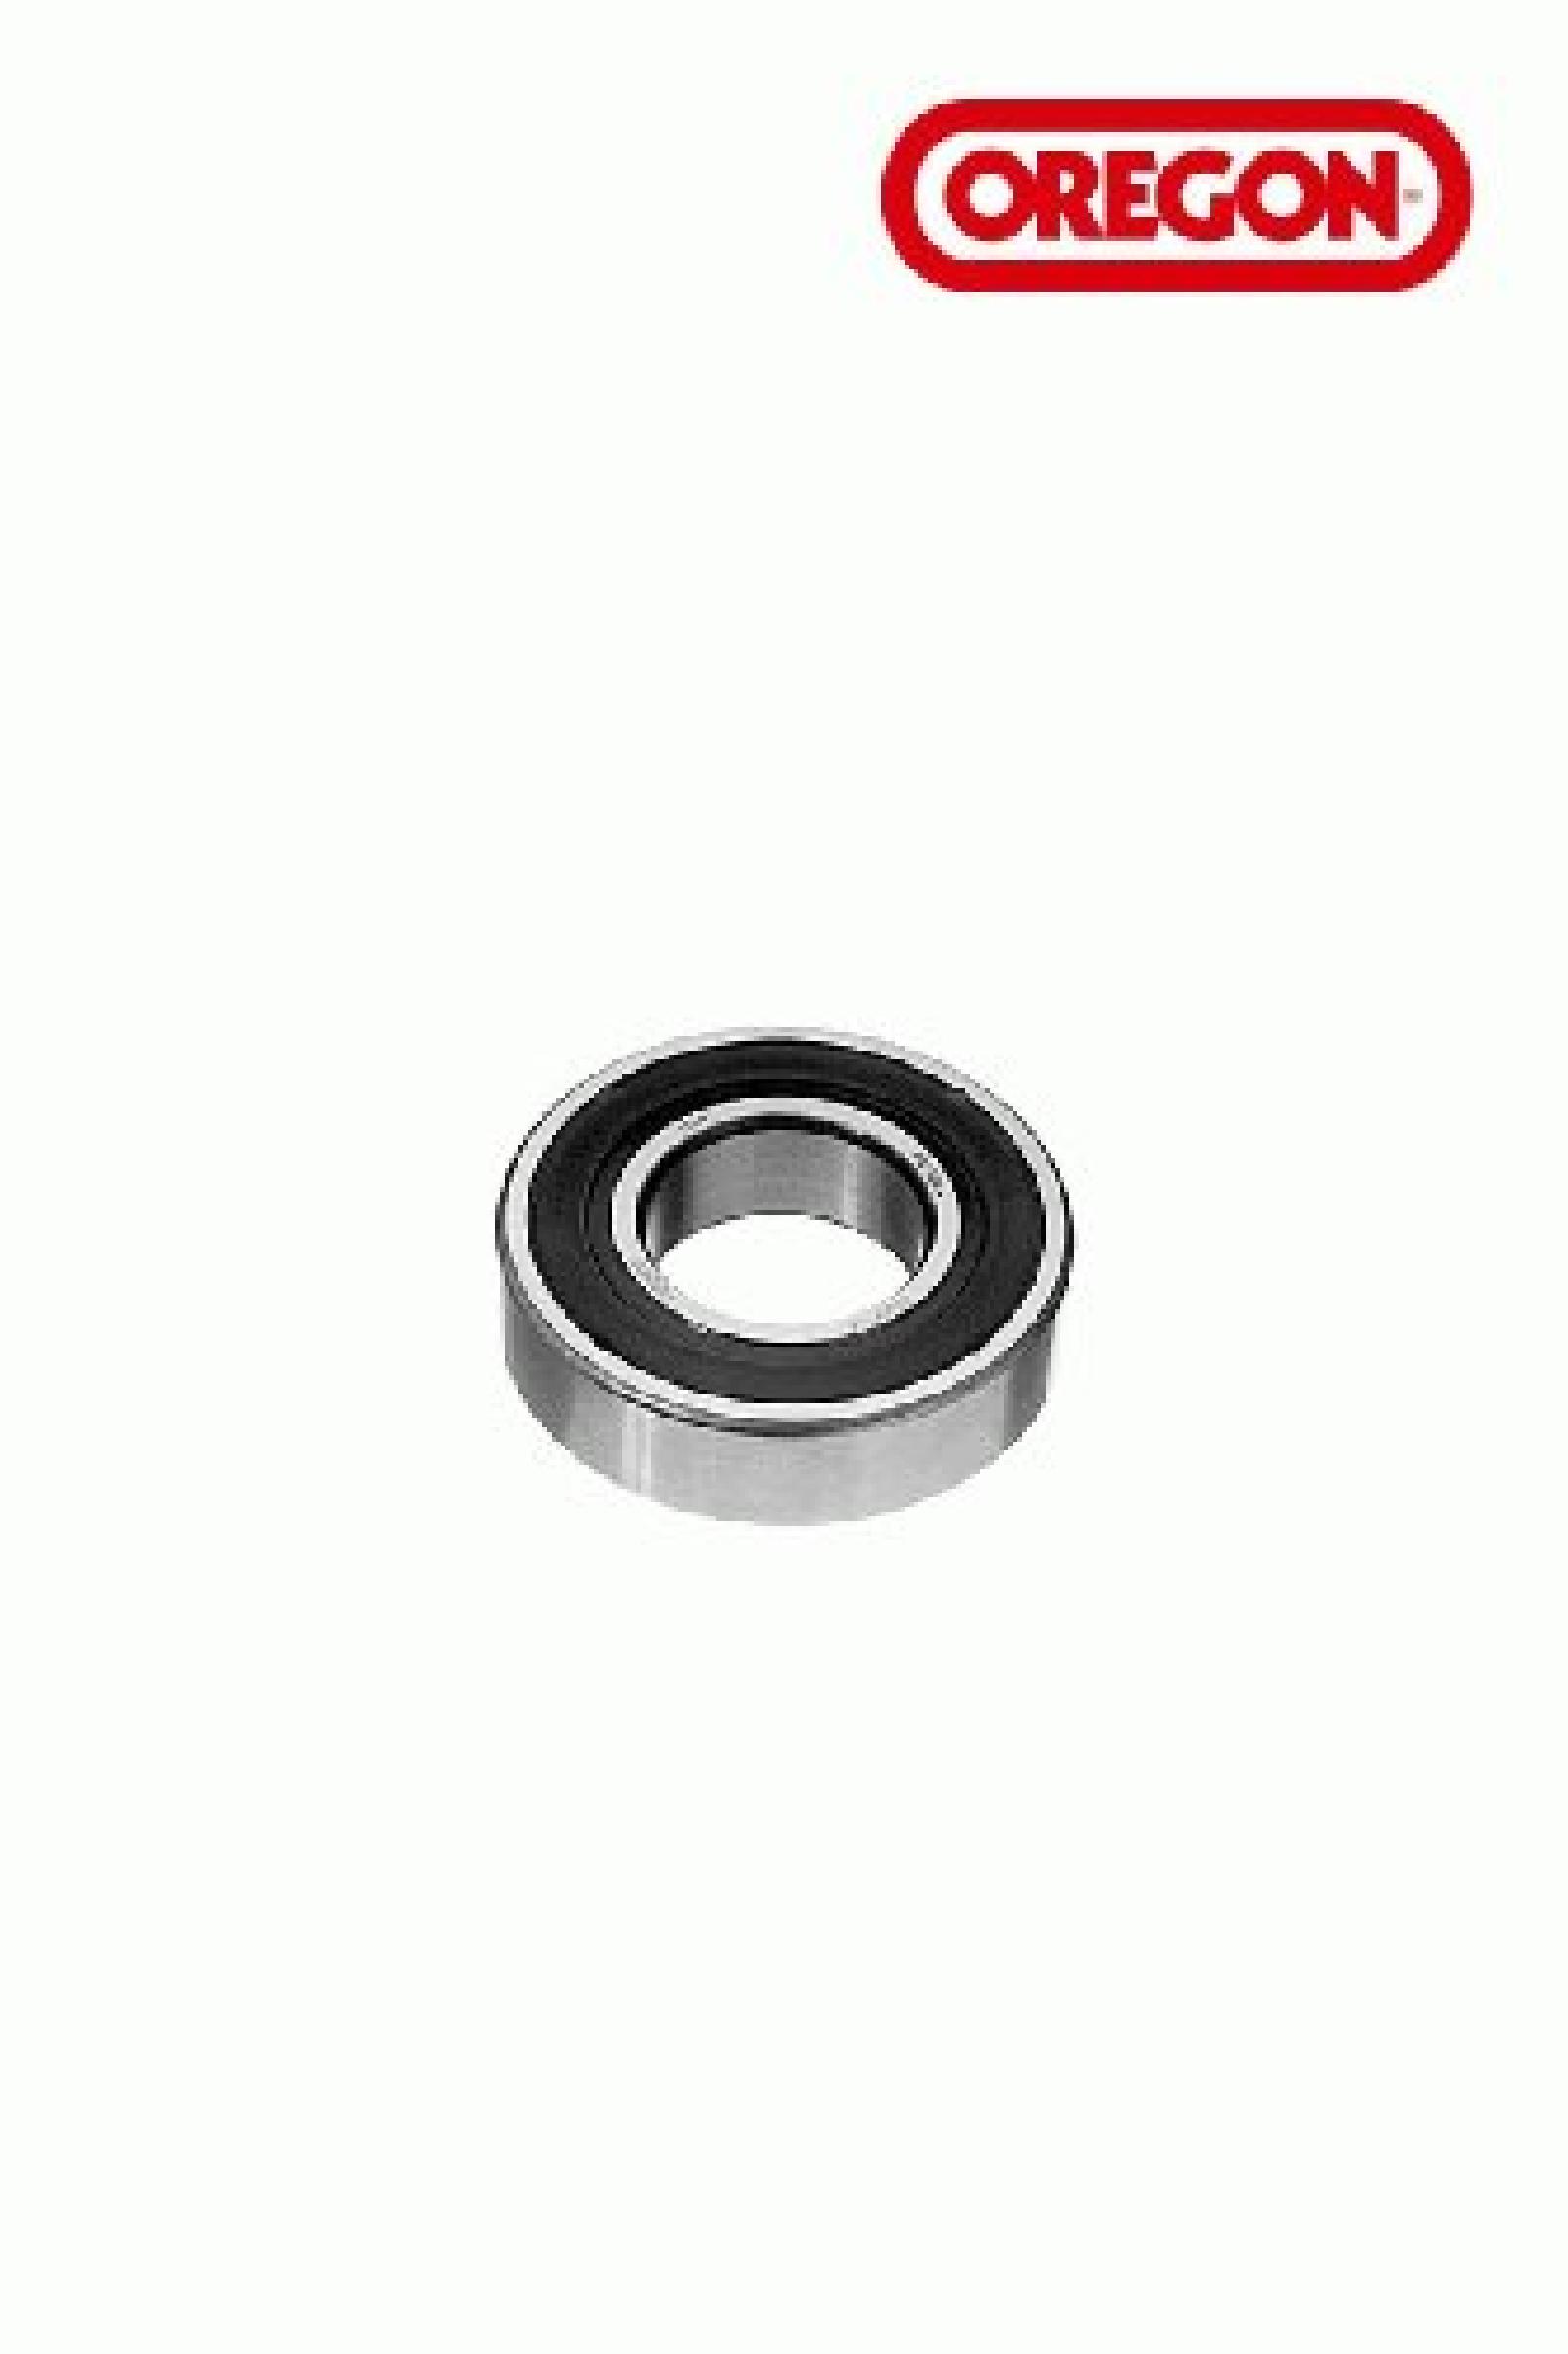 BEARING, BALL MAGNUM 6206 part# 45-207 by Oregon